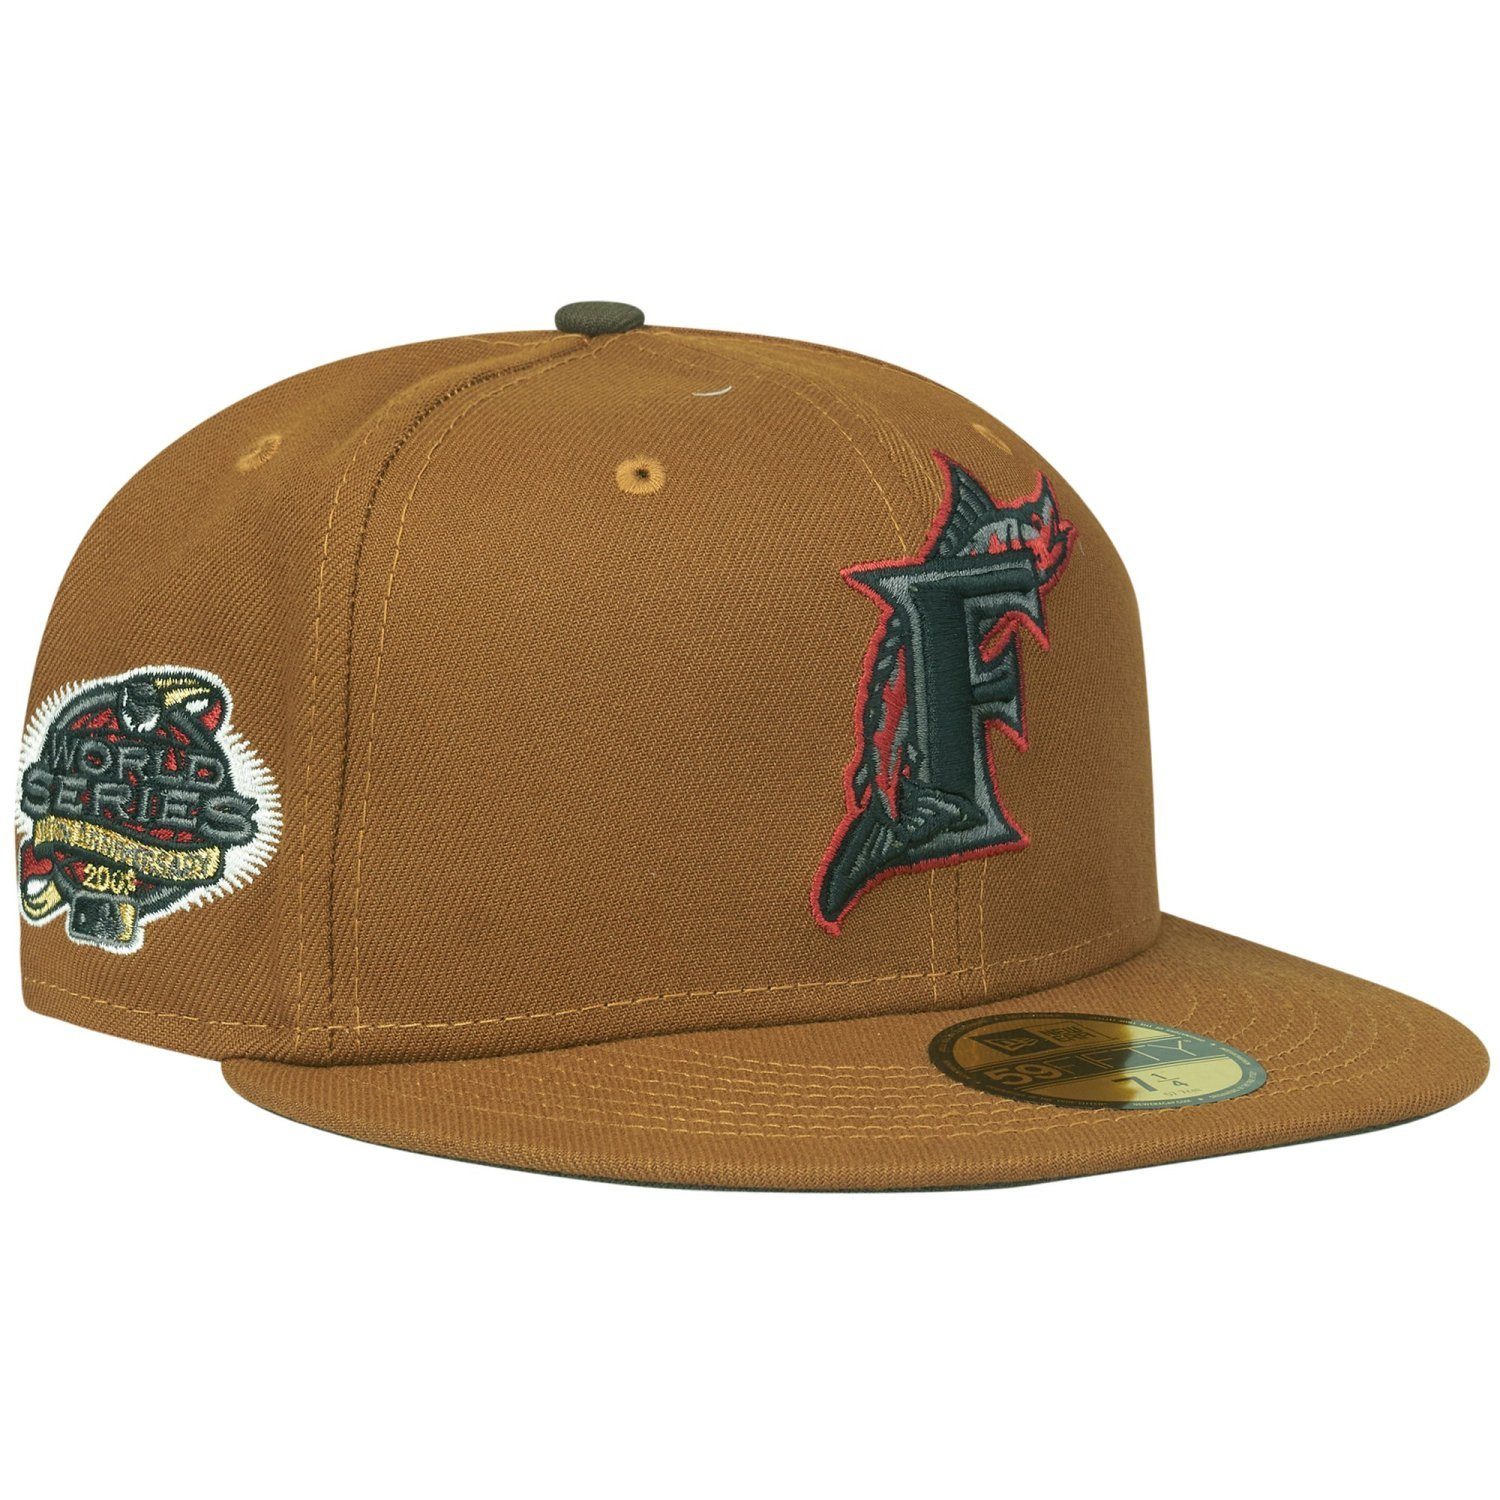 New Era Fitted Cap 59Fifty WORLD SERIES 2003 Florida Marlins